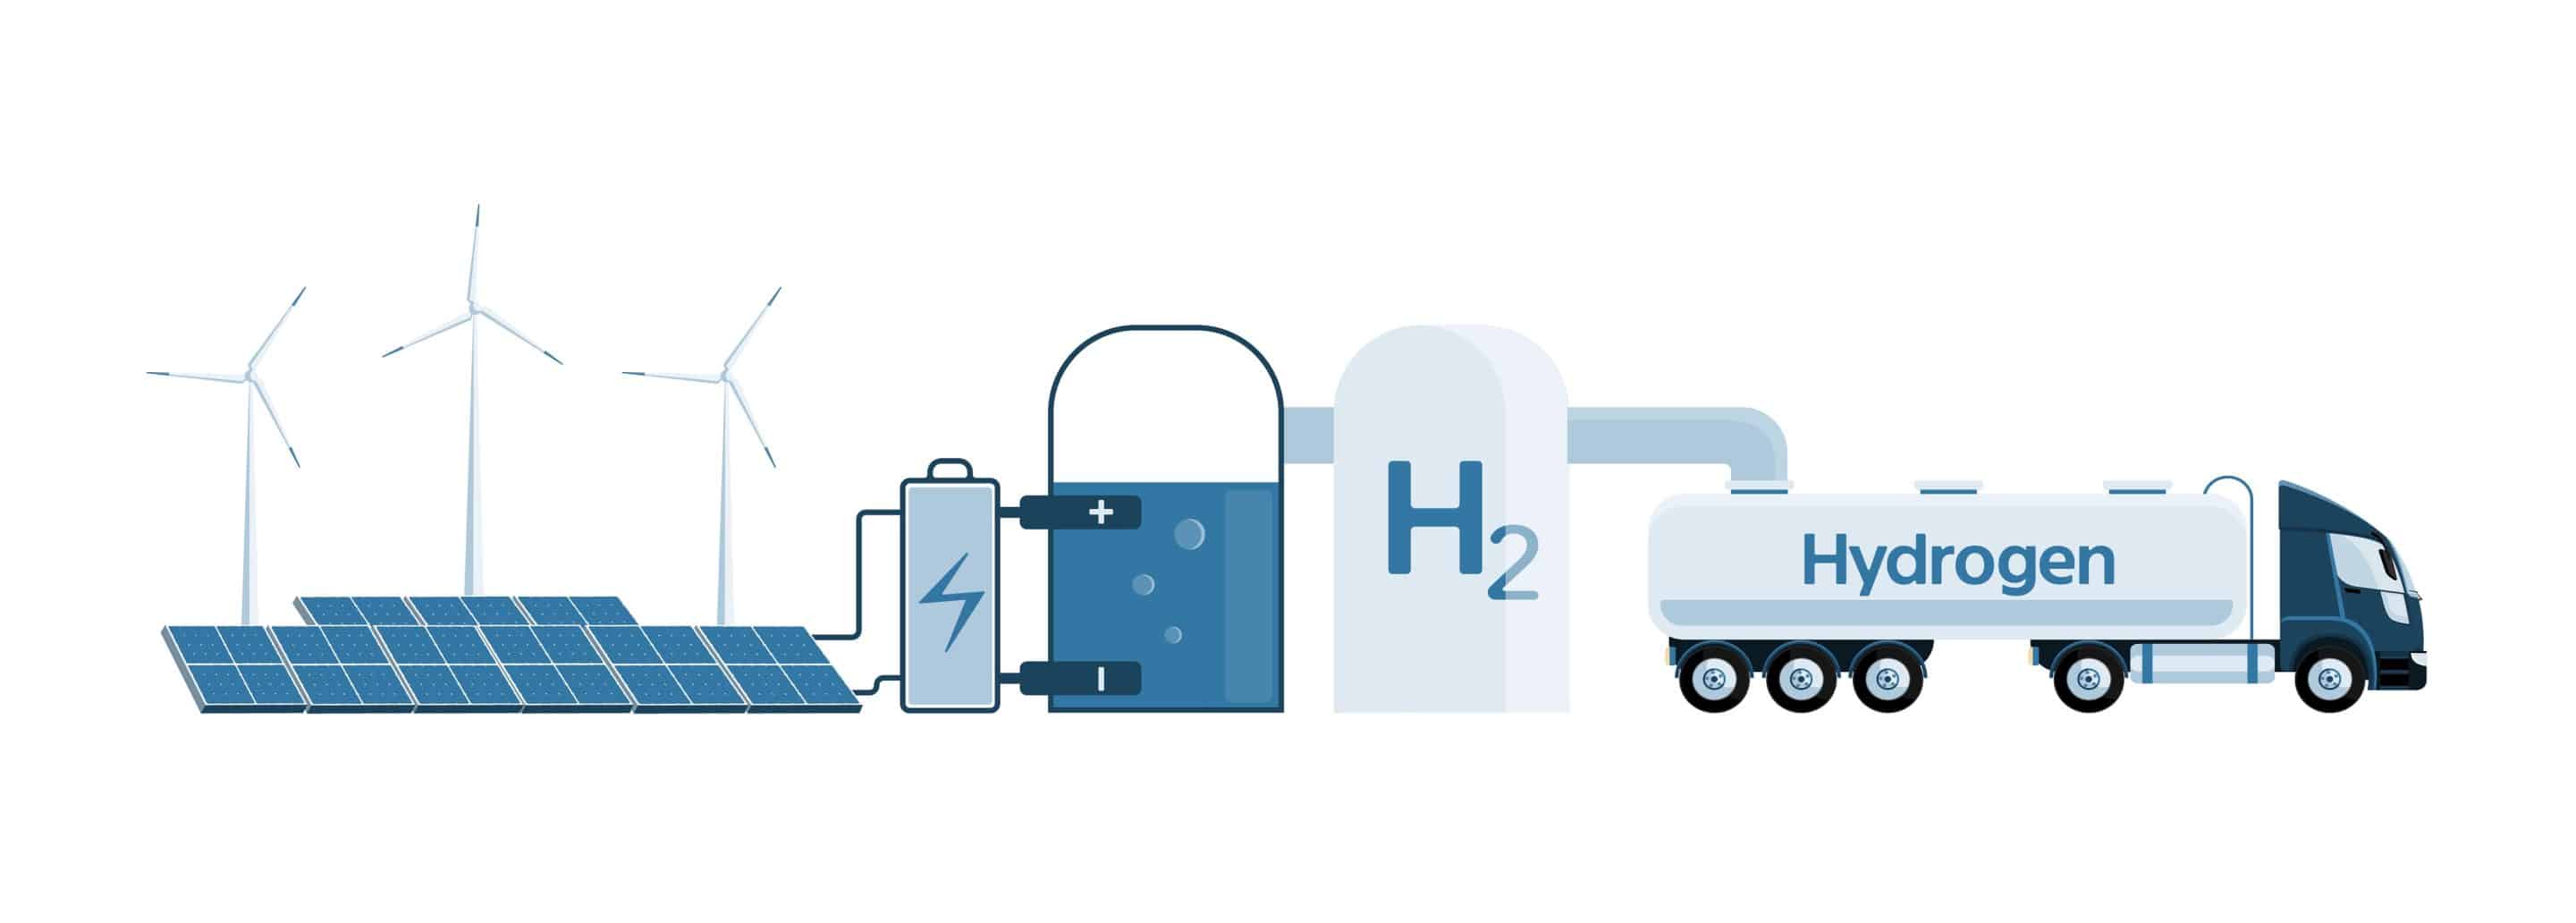 Getting,Green,Hydrogen,From,Renewable,Energy,Sources.,Vector,Illustration